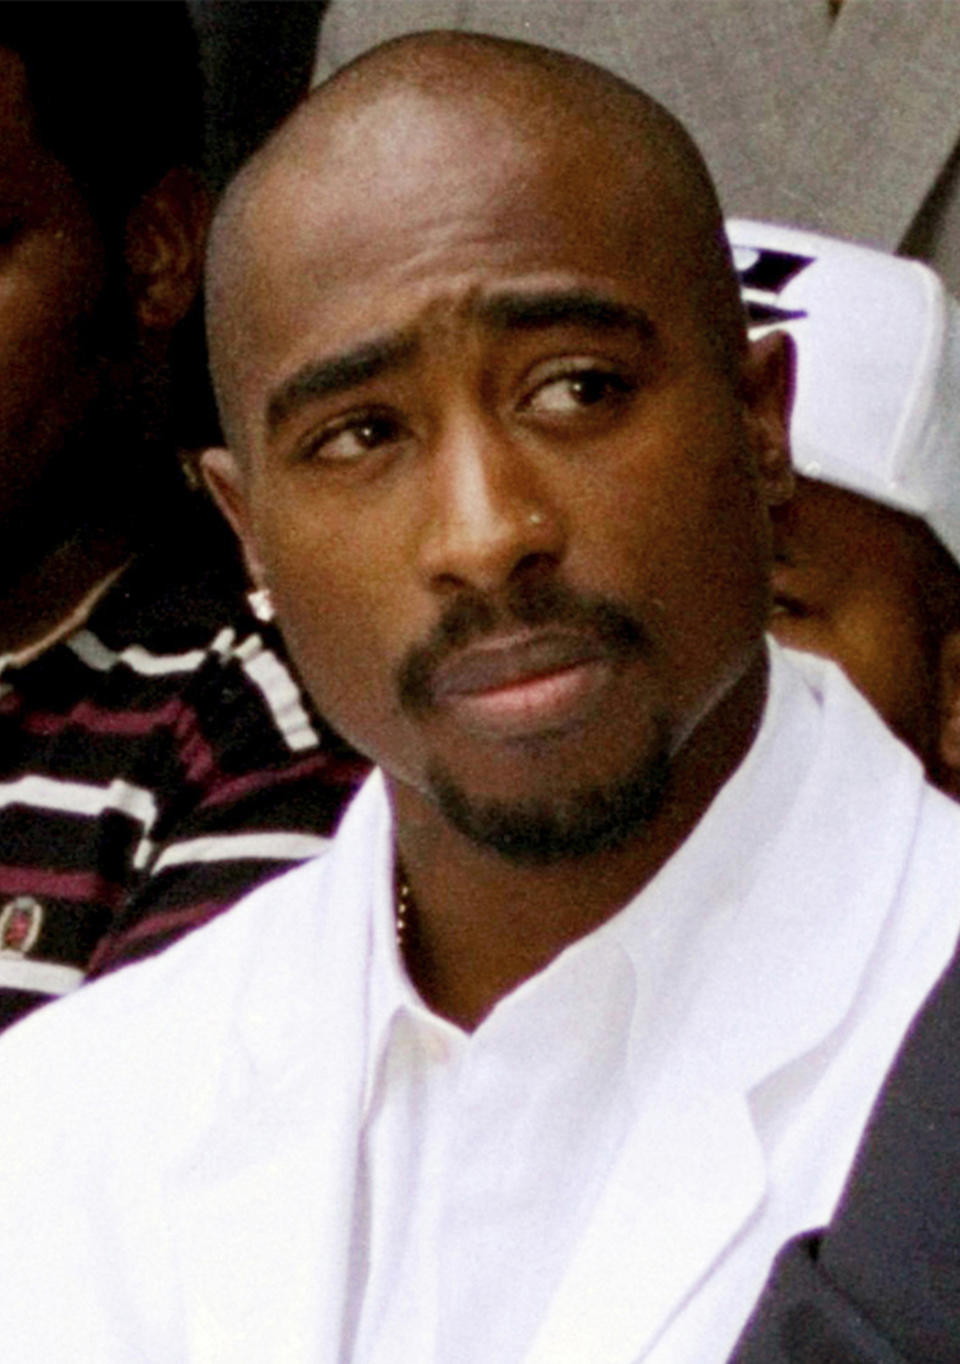 FILE - Rapper Tupac Shakur attends a voter registration event in South Central Los Angeles, Aug. 15, 1996. Shakur’s shooting in a New York recording studio in the mid-1990s sparked hip-hop’s biggest rivalry and led to the shocking deaths of two of the genre's greatest stars, Shakur, and Notorious B.I.G. Nearly three decades later, the recent arrest of longtime suspect Duane “Keffe D” Davis has ignited another wave of intrigue in their unsolved murders. (AP Photo/Frank Wiese, File)